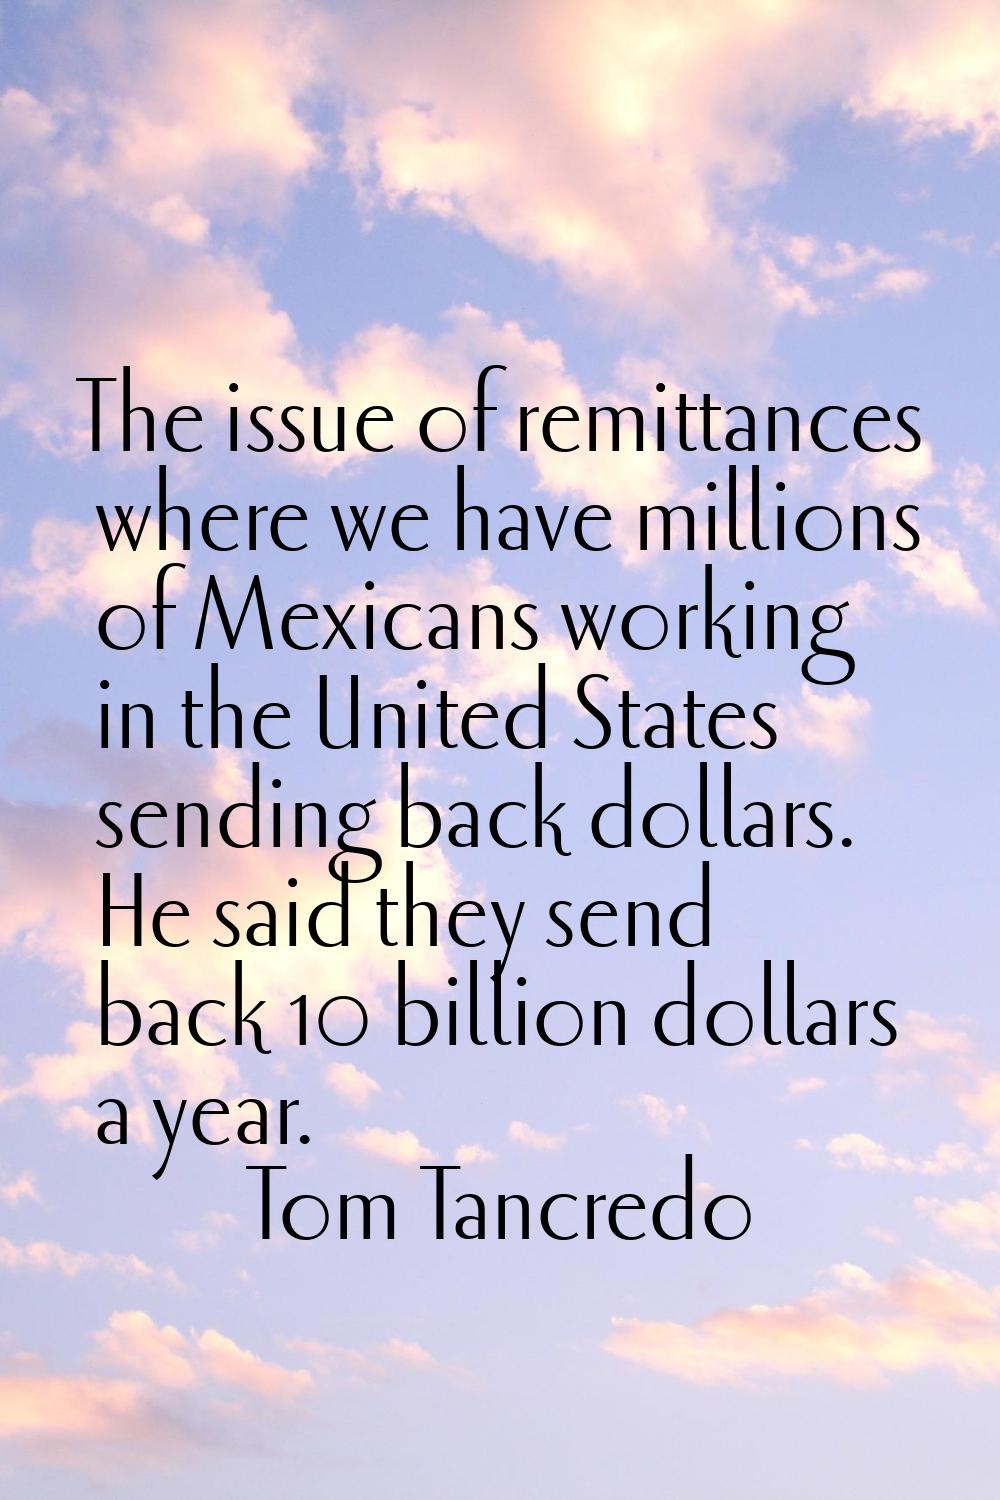 The issue of remittances where we have millions of Mexicans working in the United States sending ba